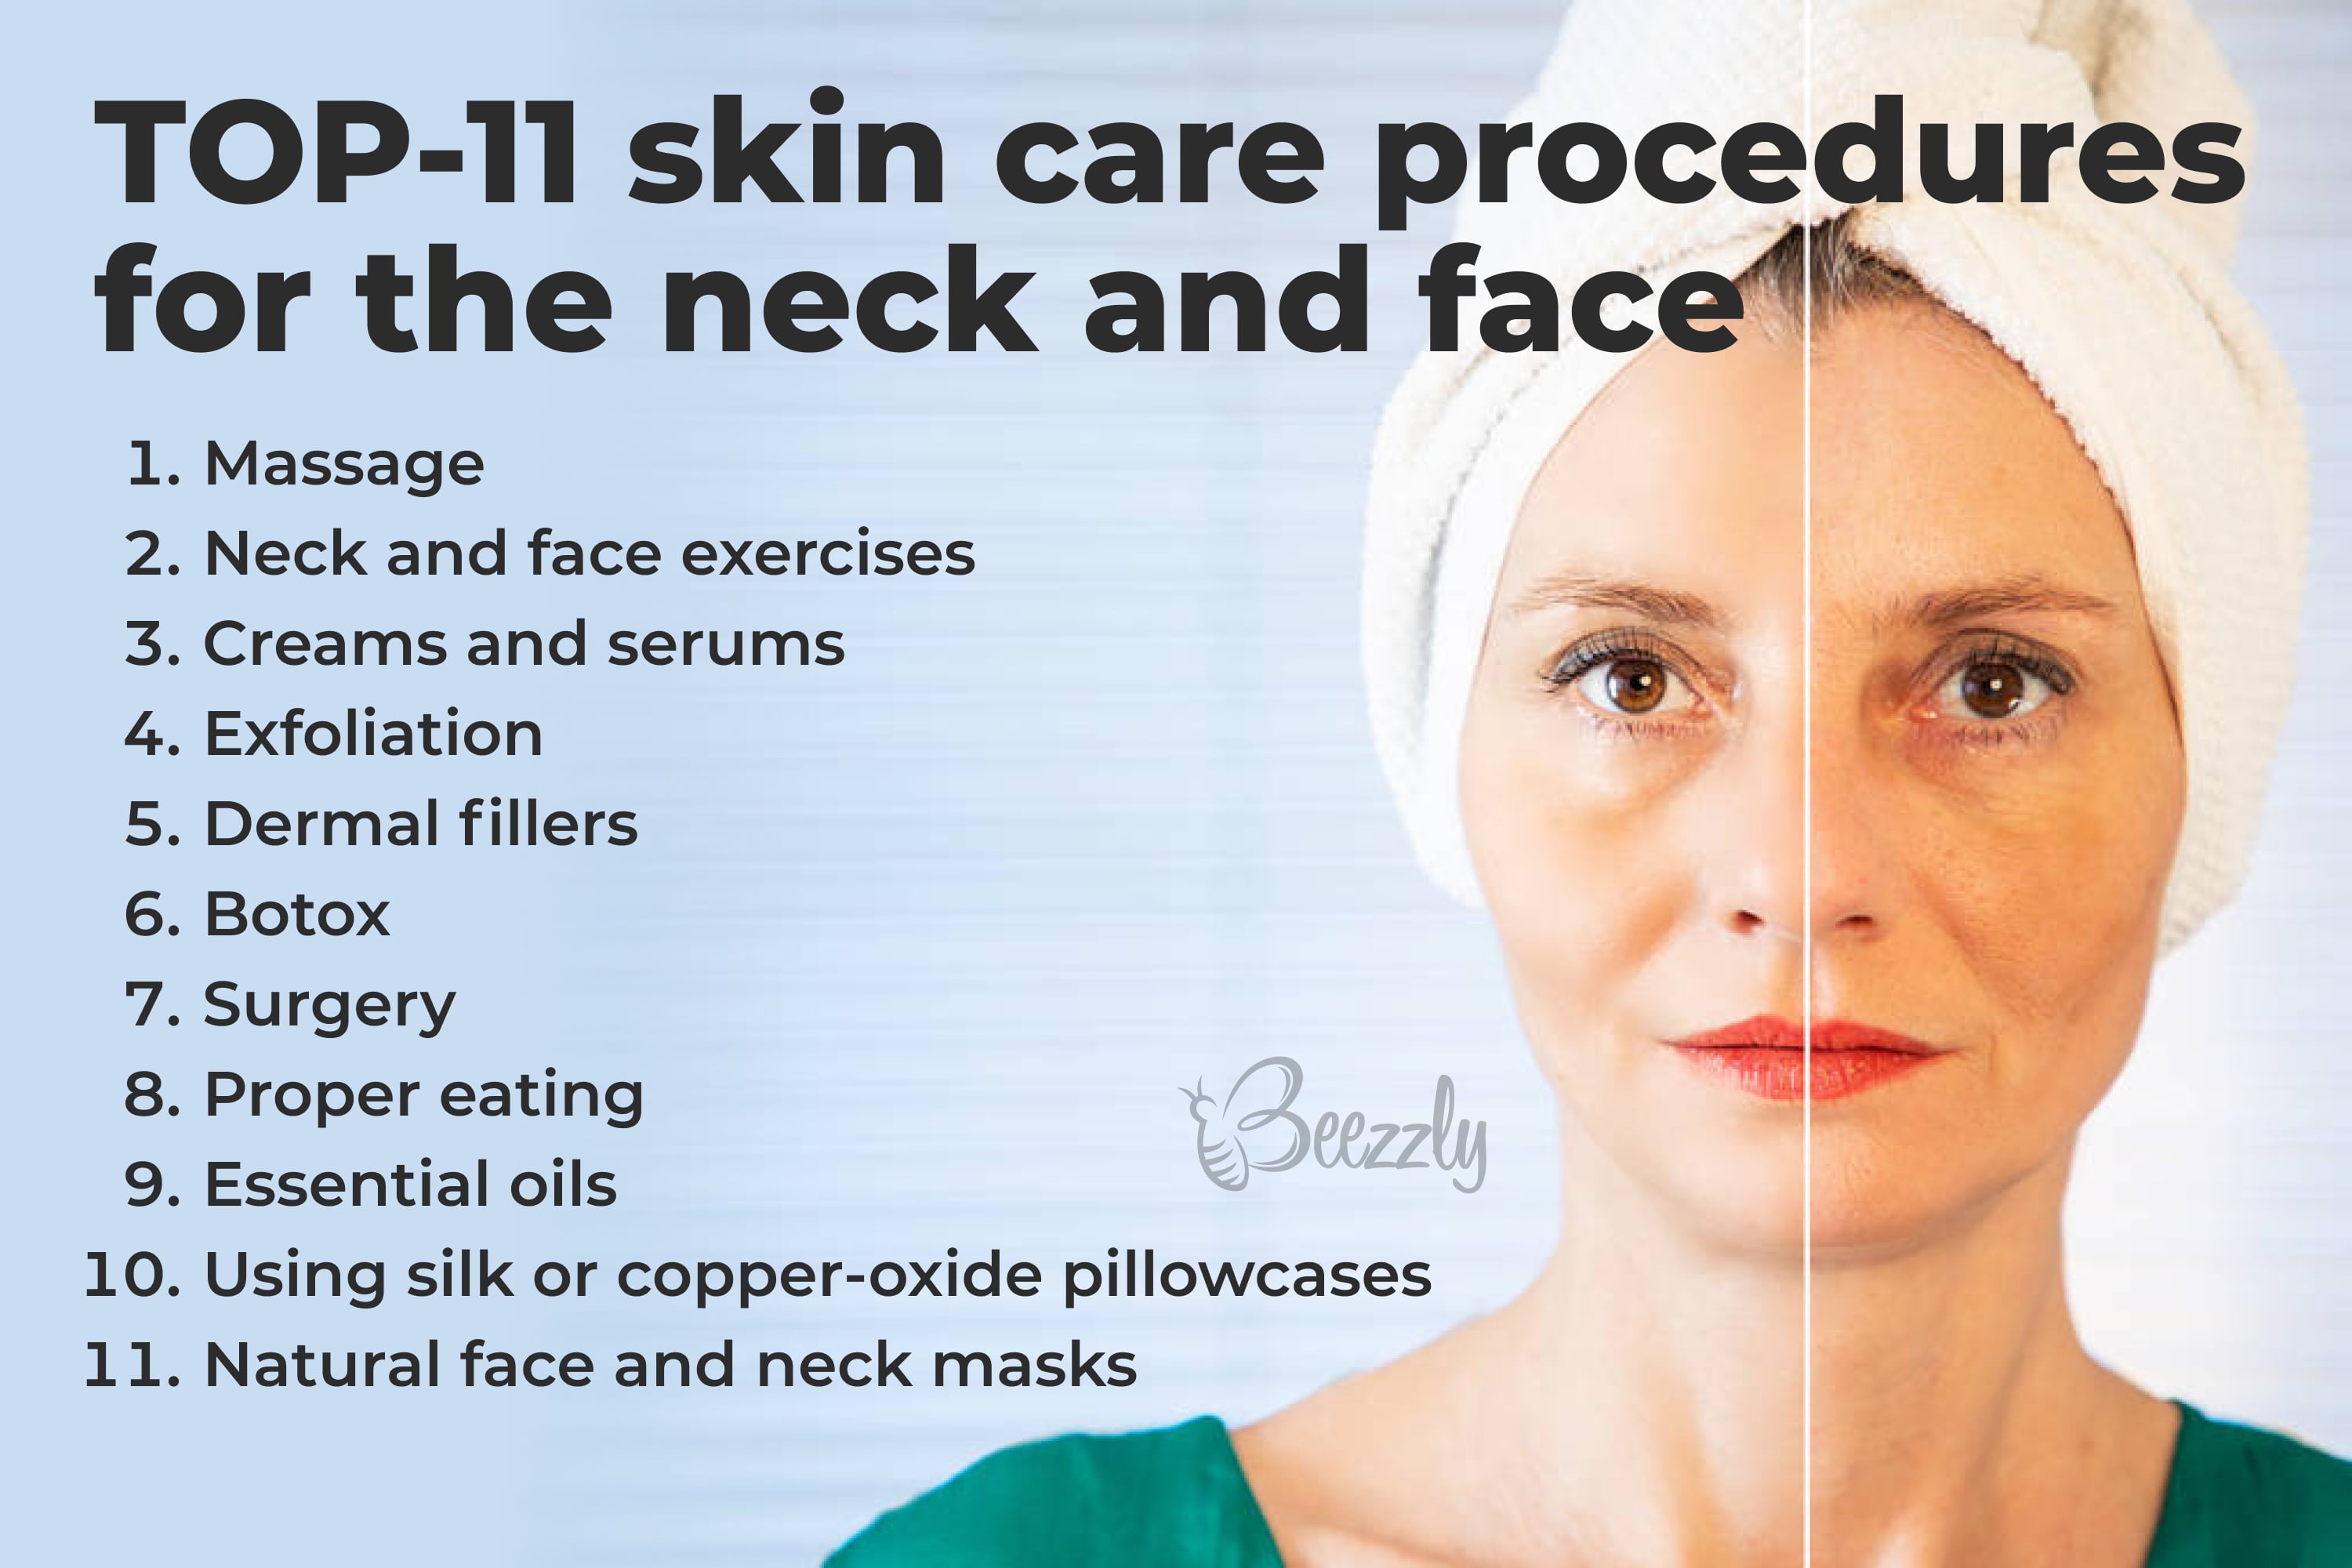 TOP 11 Skin care procedures for the neck and face